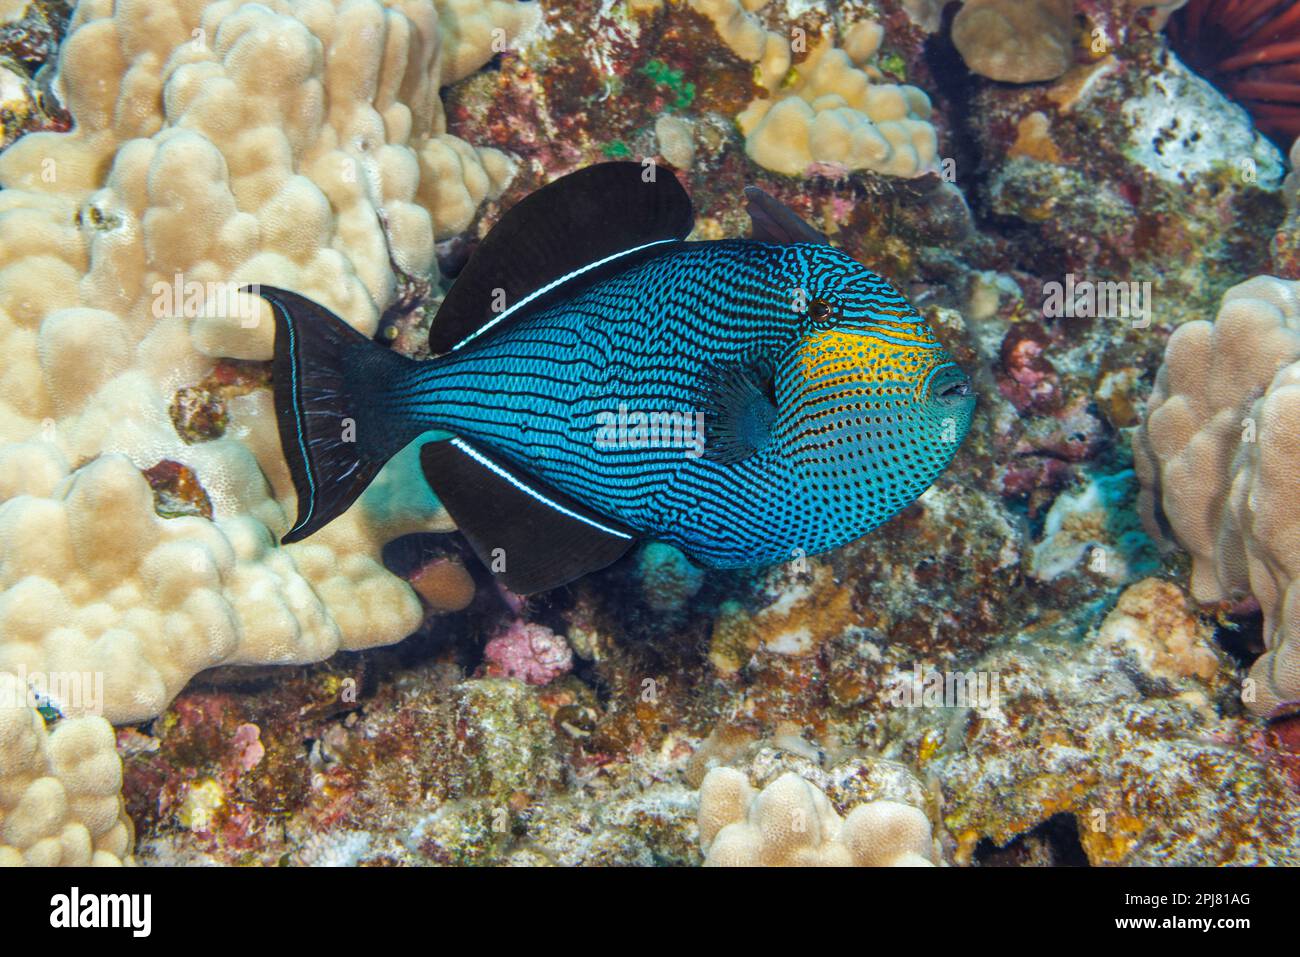 Black triggerfish, Melichthys niger, are often found in large schools over reef areas.  They are also known as black durgon, Hawaii. This individual i Stock Photo